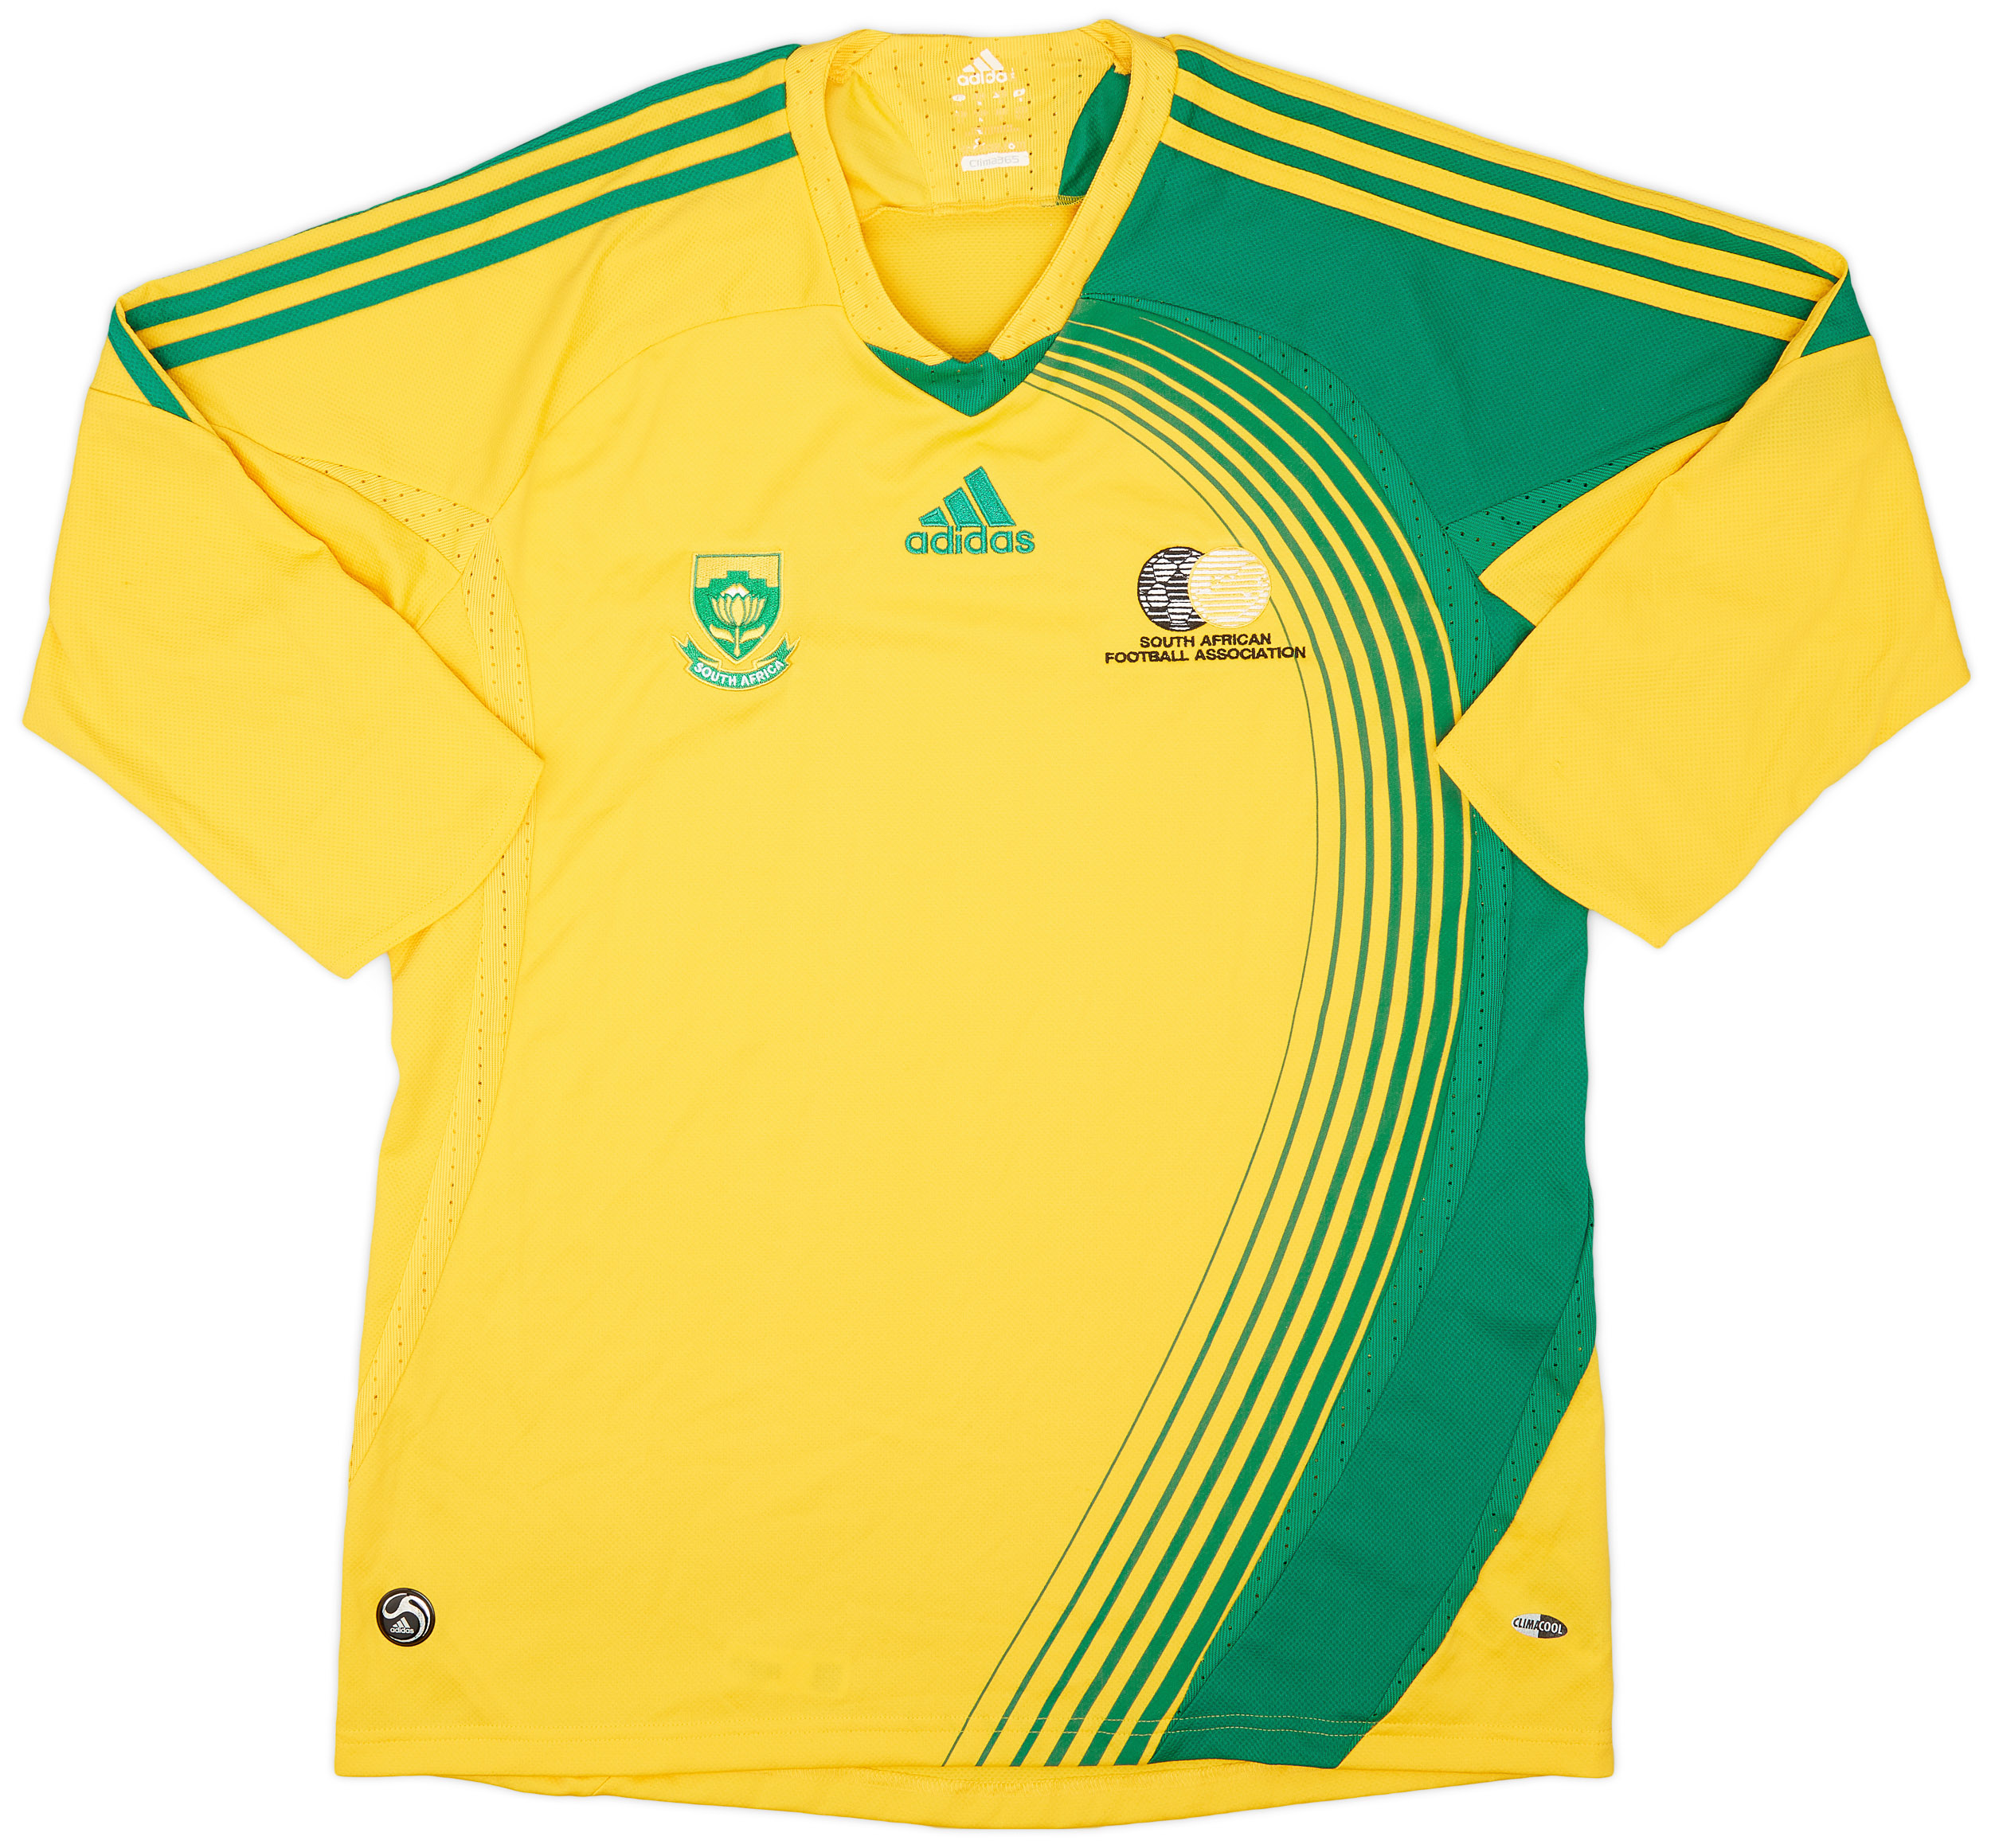 2009-10 South Africa Home Shirt - 8/10 - ()